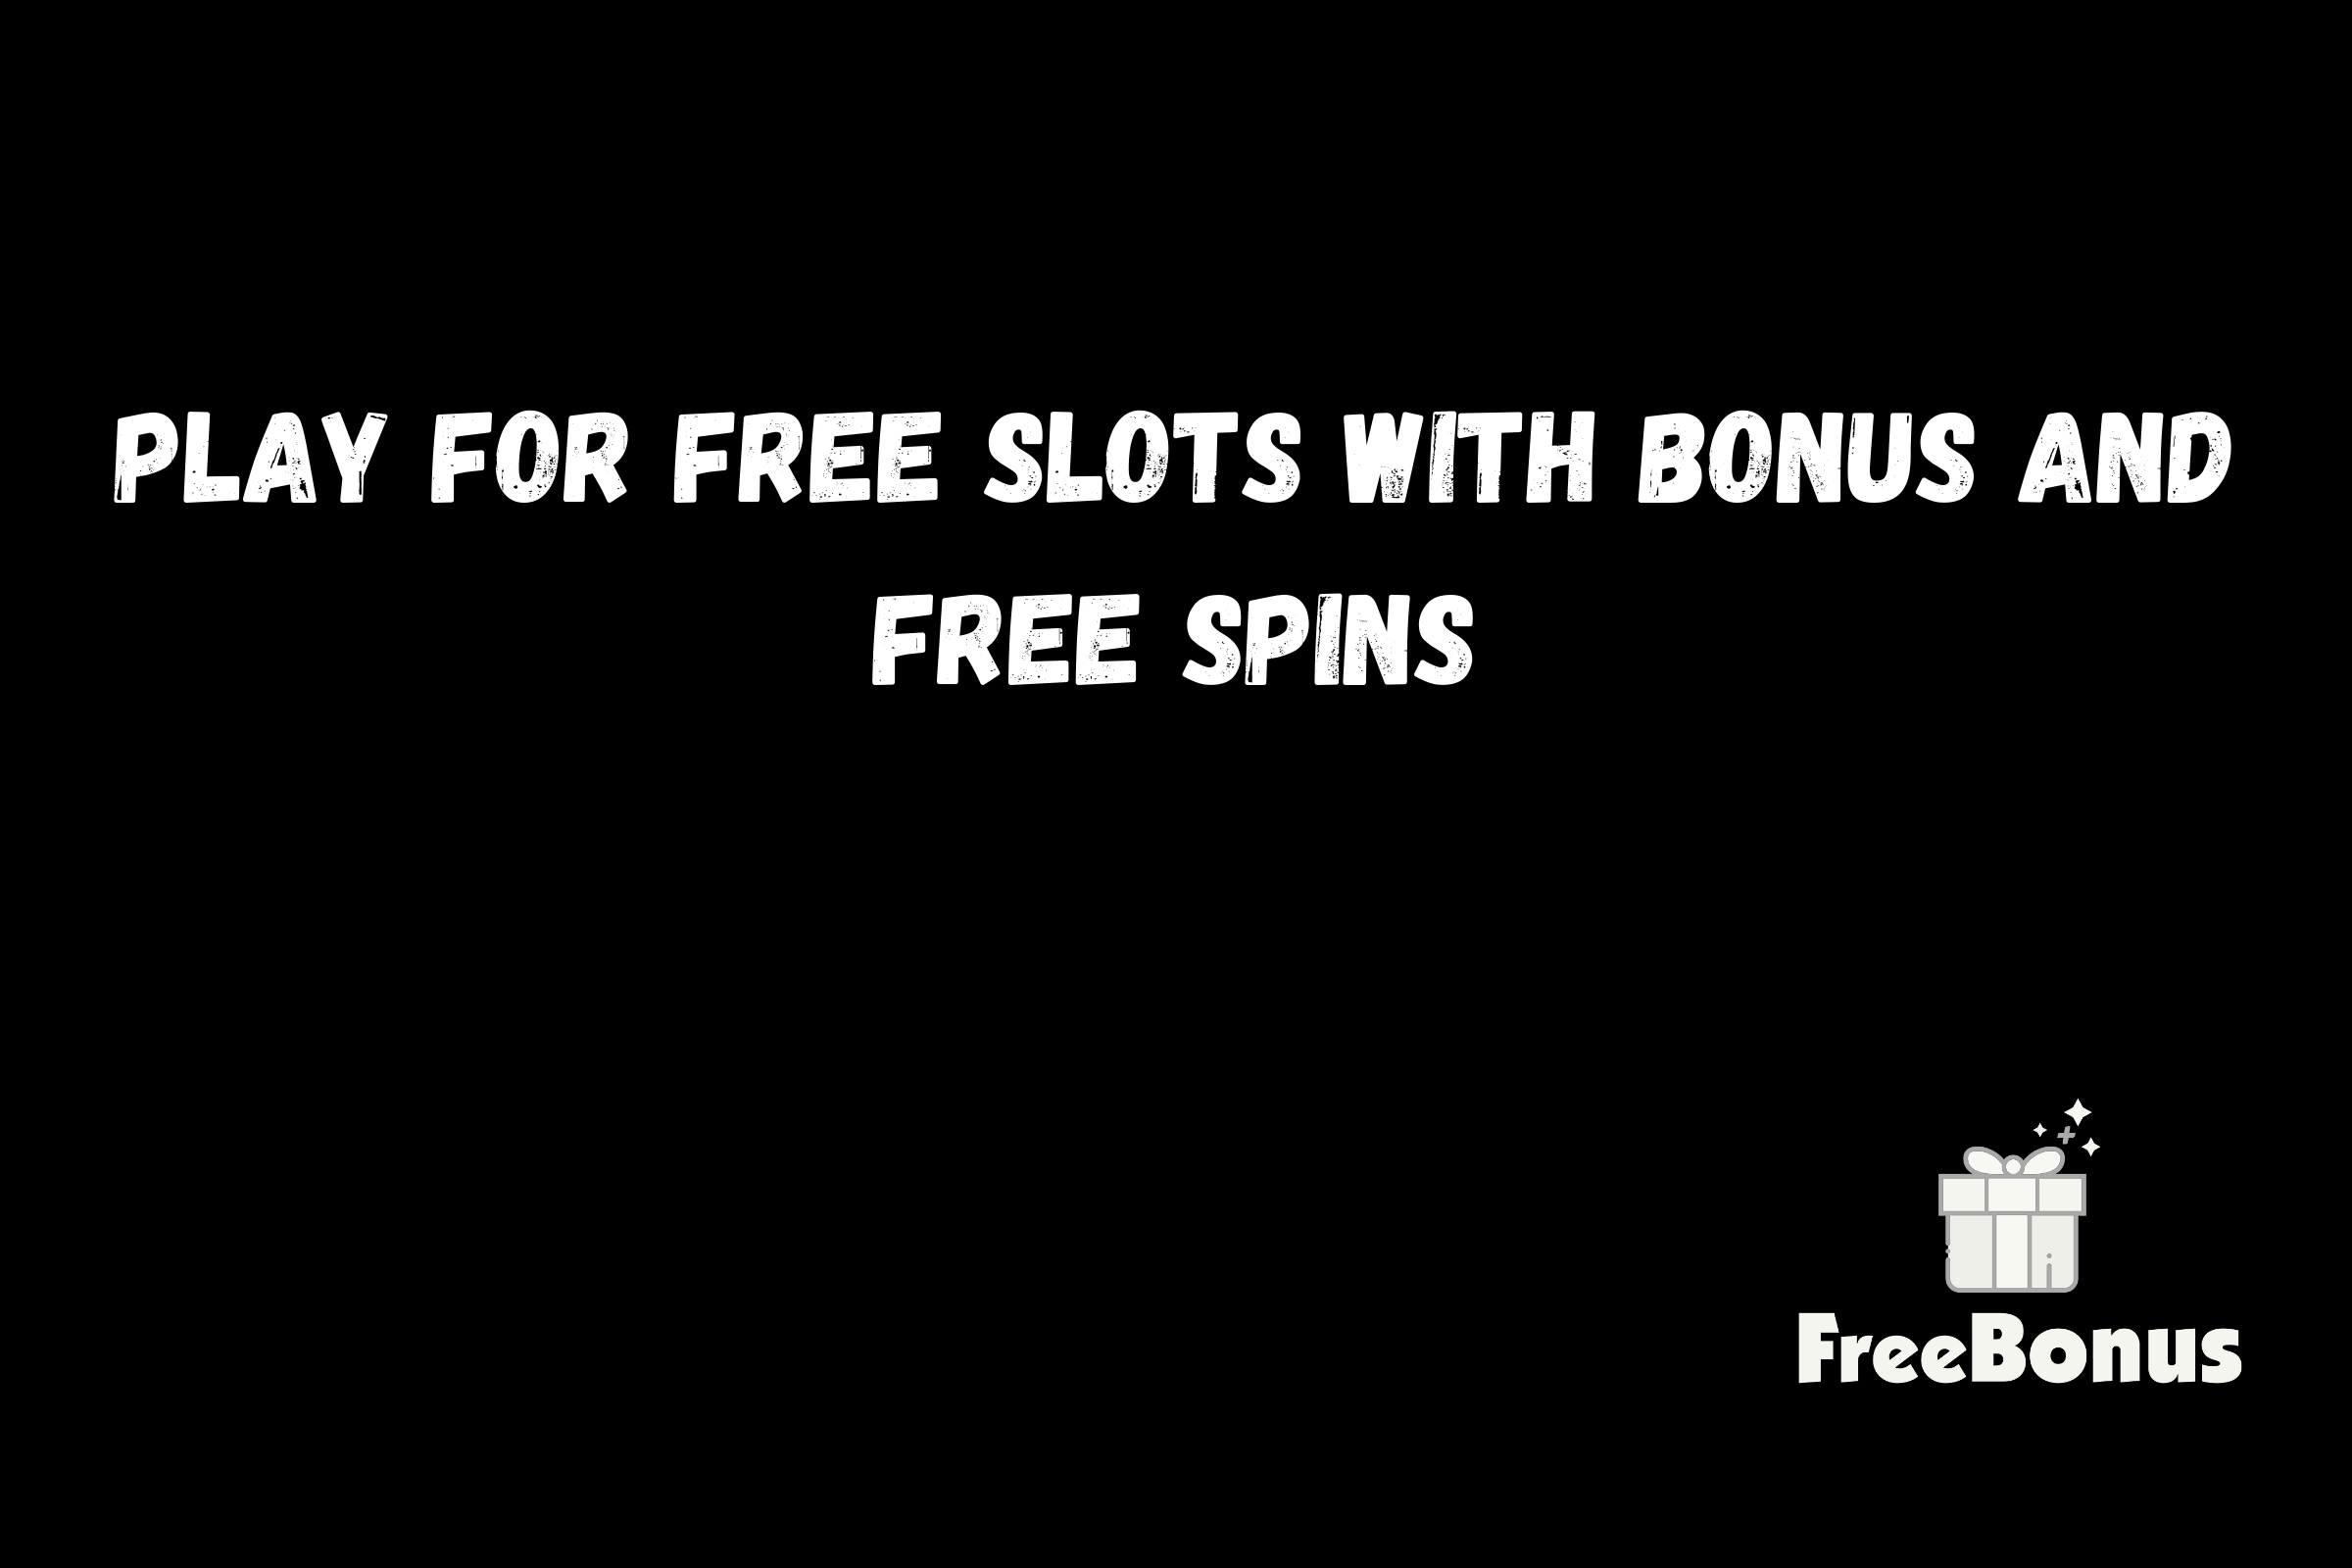 Play For Free Slots With Bonus And Free Spins